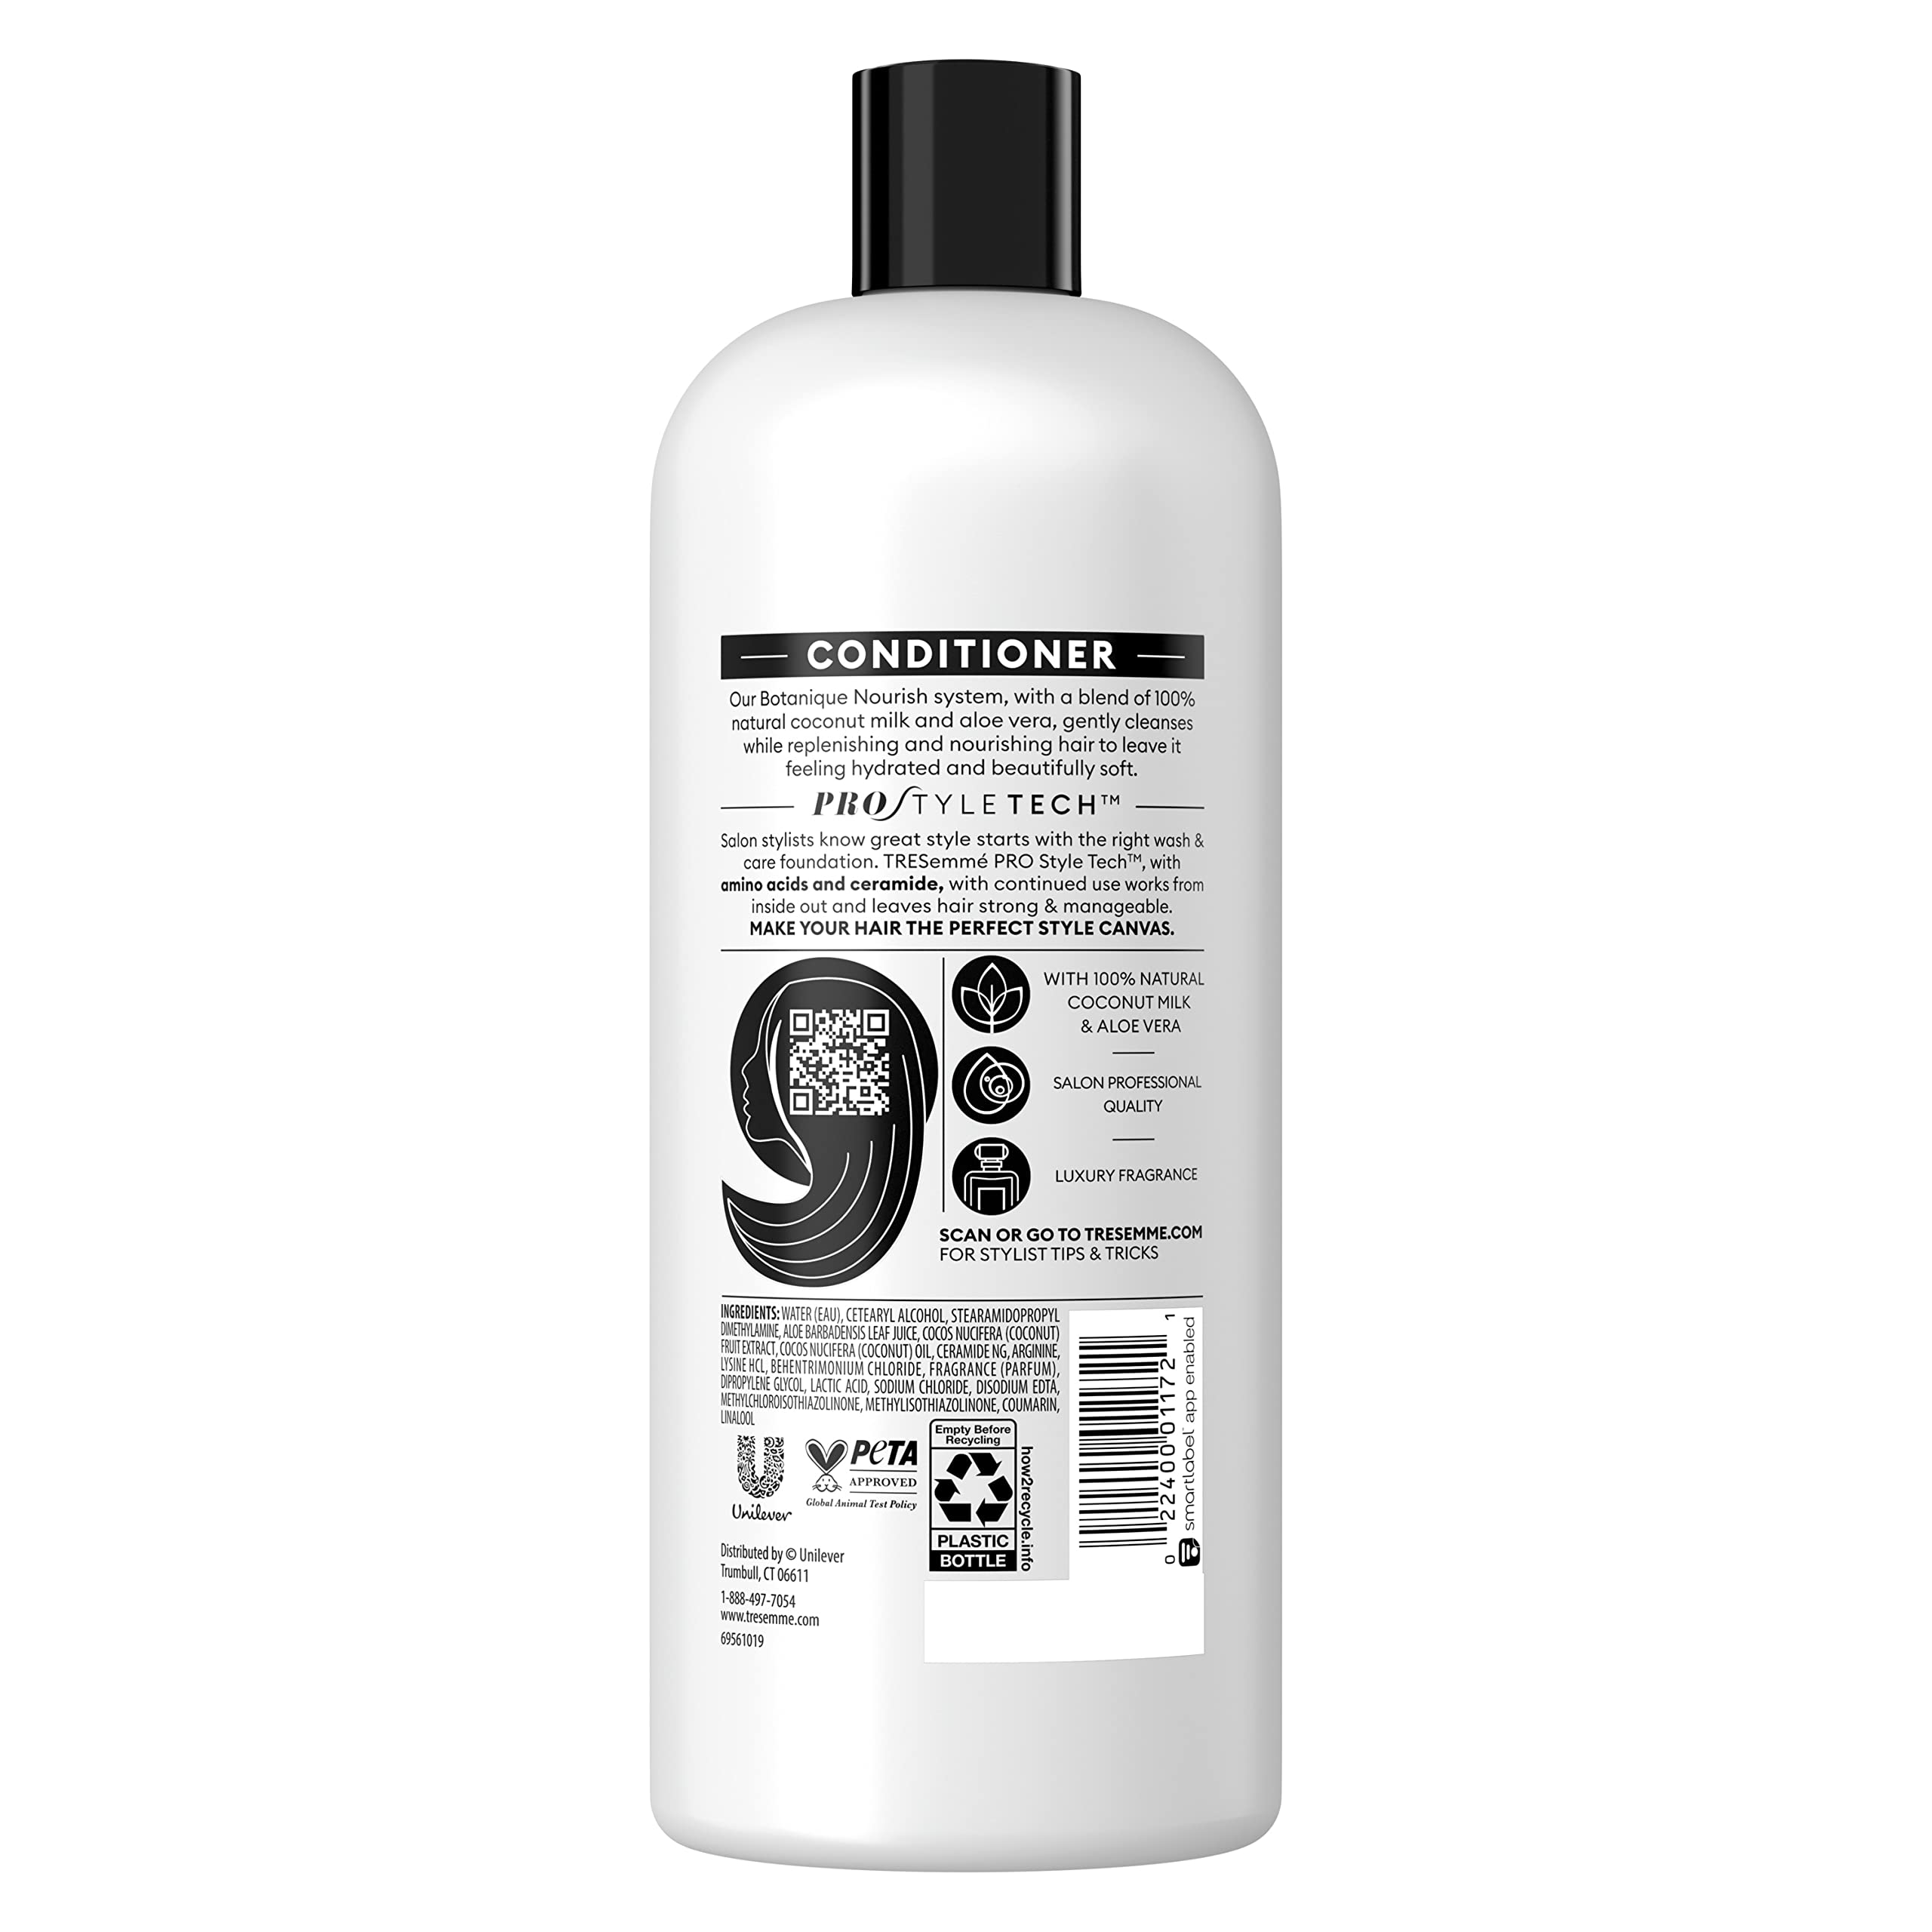 TRESemmé Hydrating Conditioner 4 Count With 100% Natural Coconut Milk and Aloe Vera 28 oz